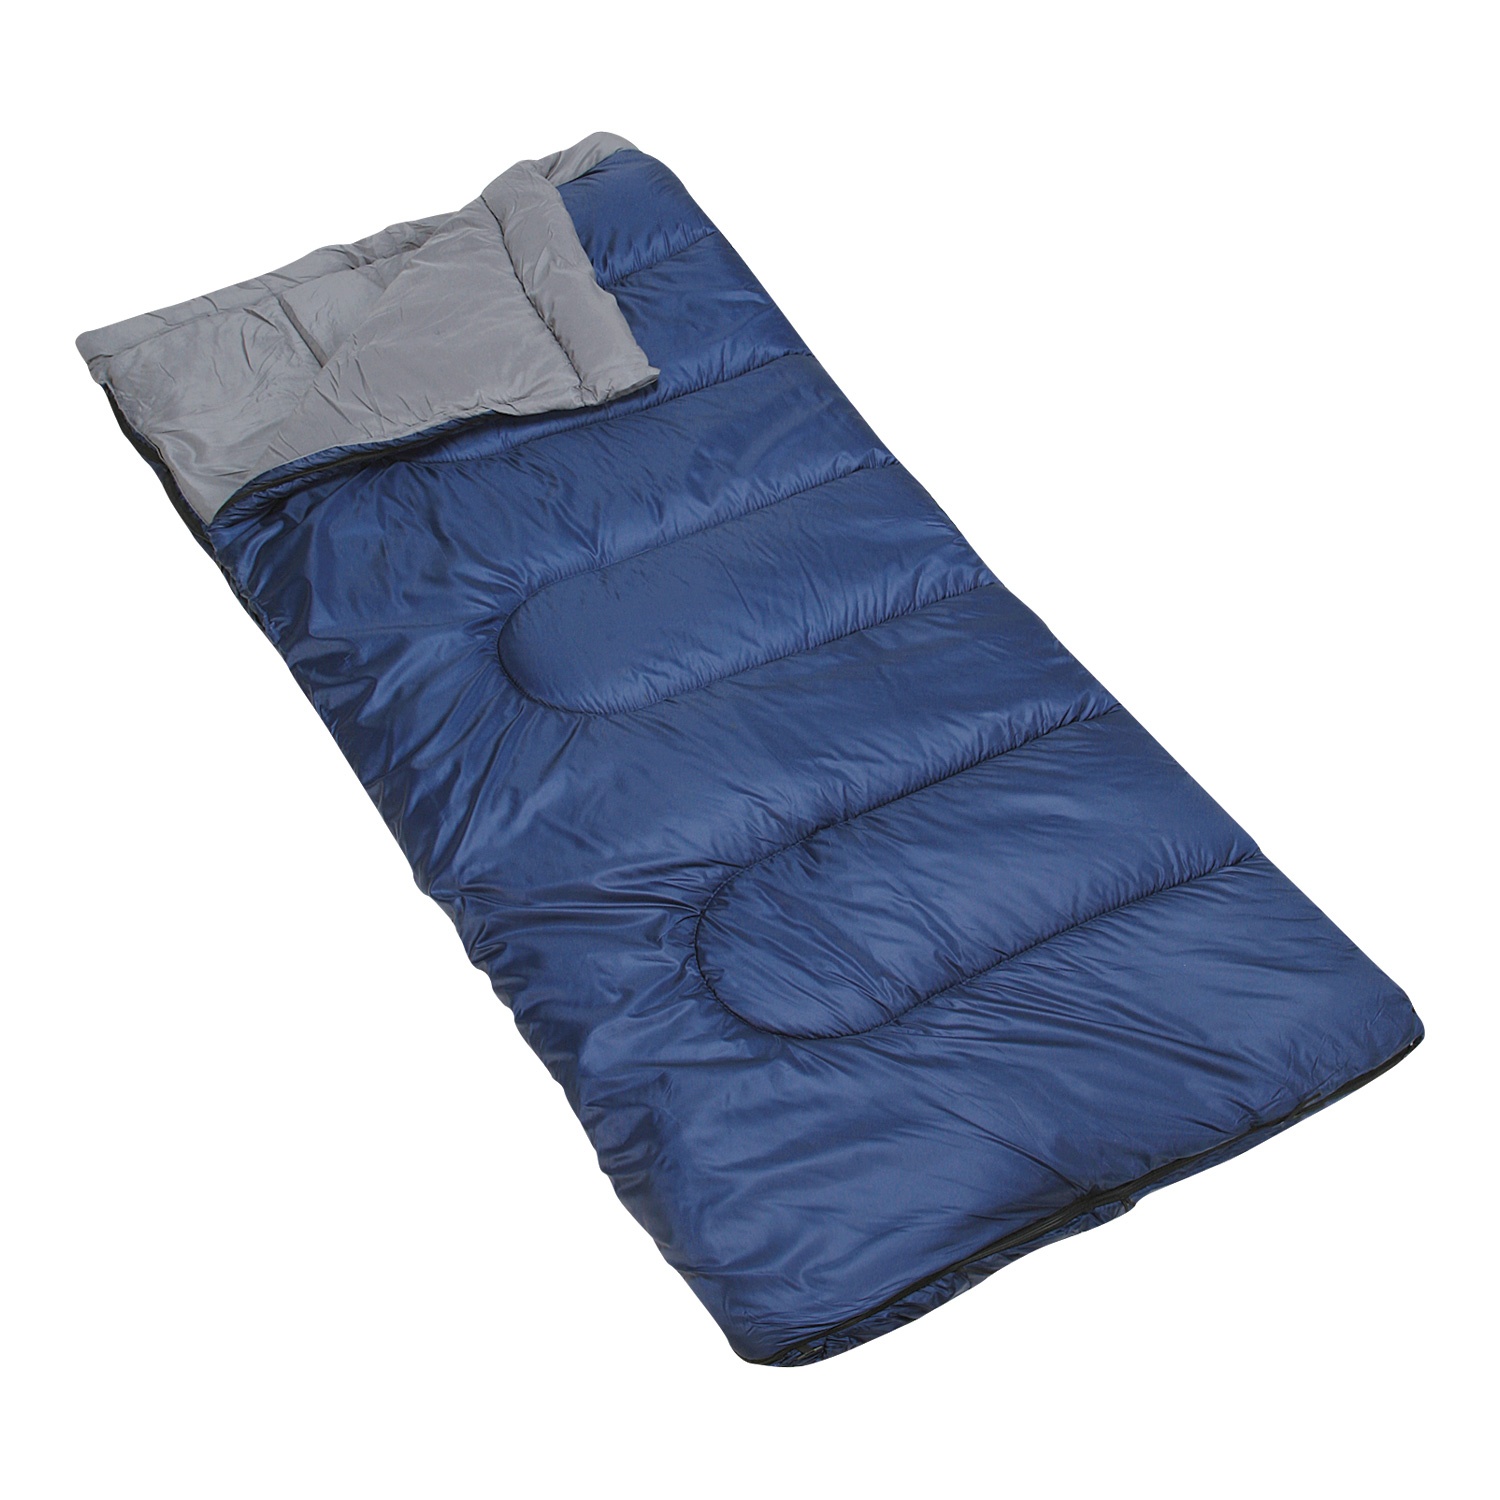 Picture Of Sleeping Bag   Clipart Best